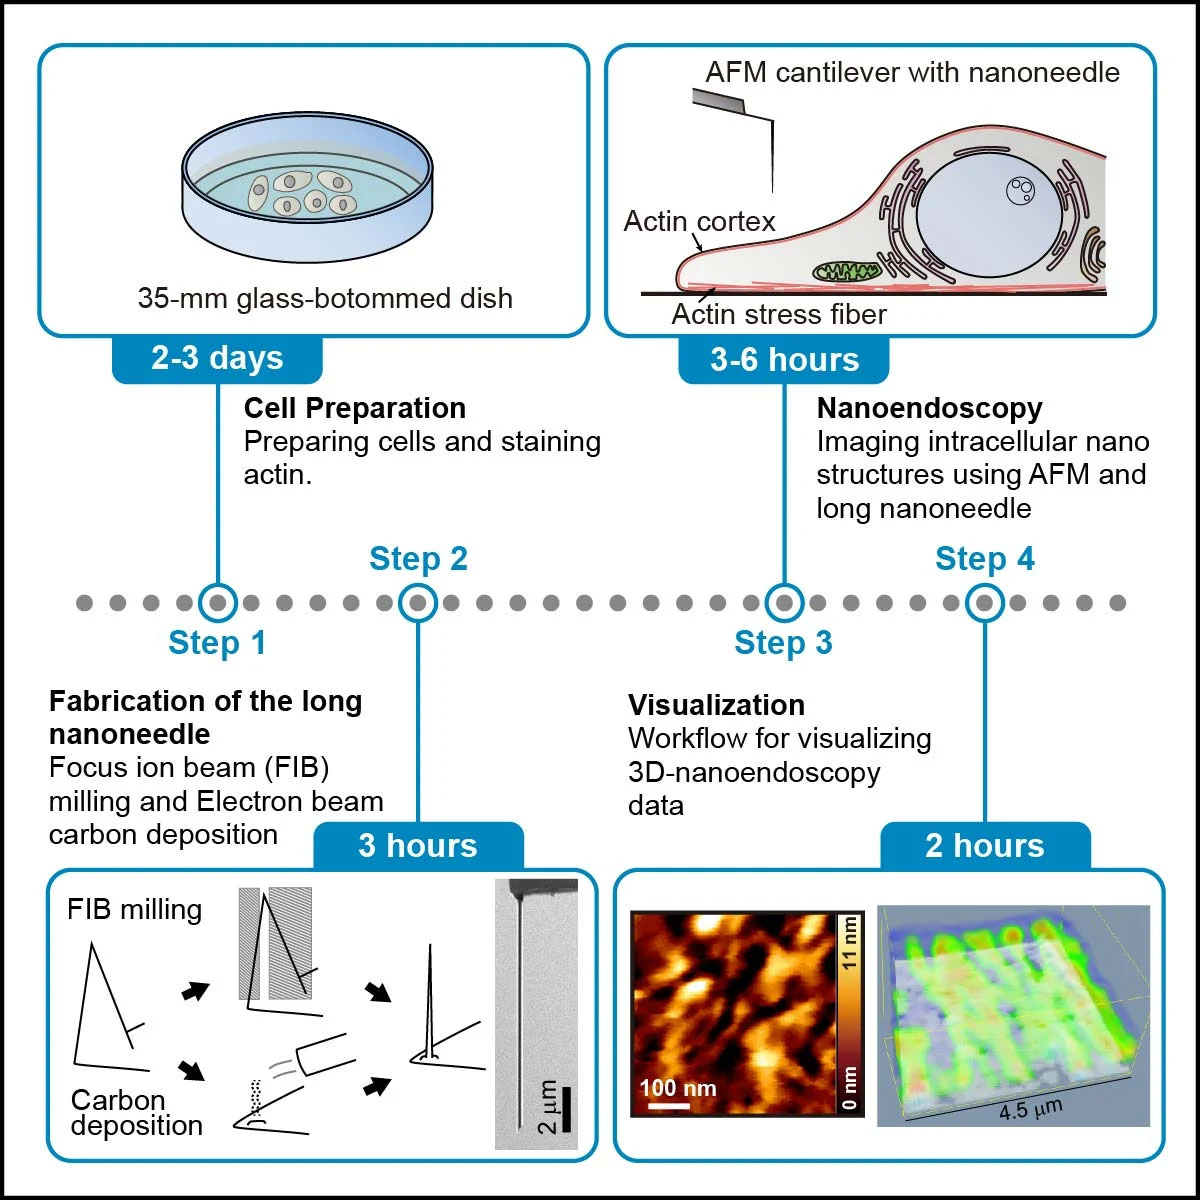 Overview of the method for observing actin fibers in living cells using nanoendoscopy-AFM